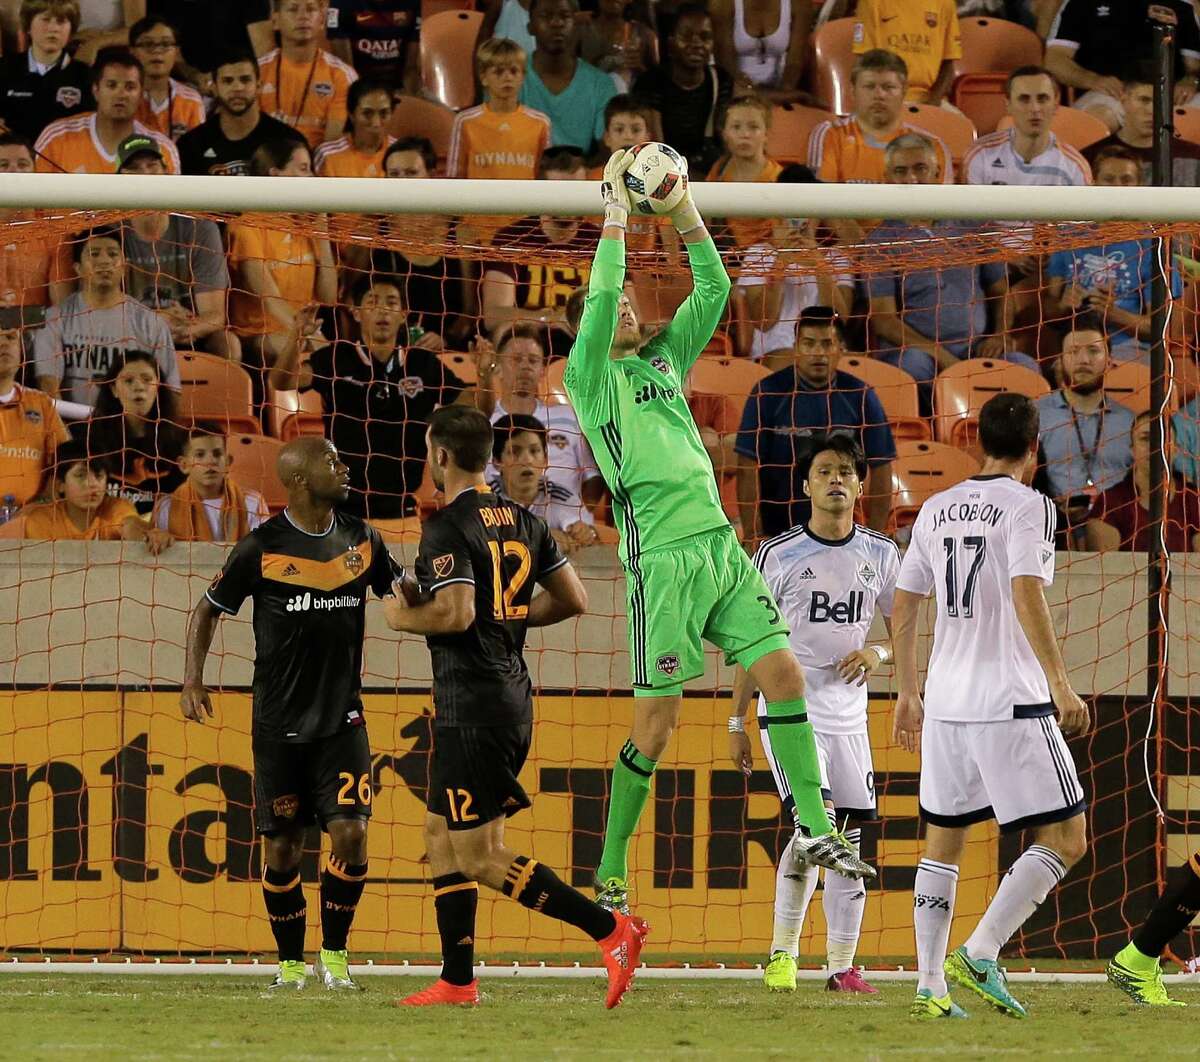 Houston Dynamo goalkeeper Joe Willis (31) makes save as Vancouver Whitecaps midfielder Andrew Jacobson (17) watches the second half during an MLS soccer match Saturday, July 23, 2016, in Houston. Houston and Vancouver played to scoreless draw. (AP Photo/Bob Levey)